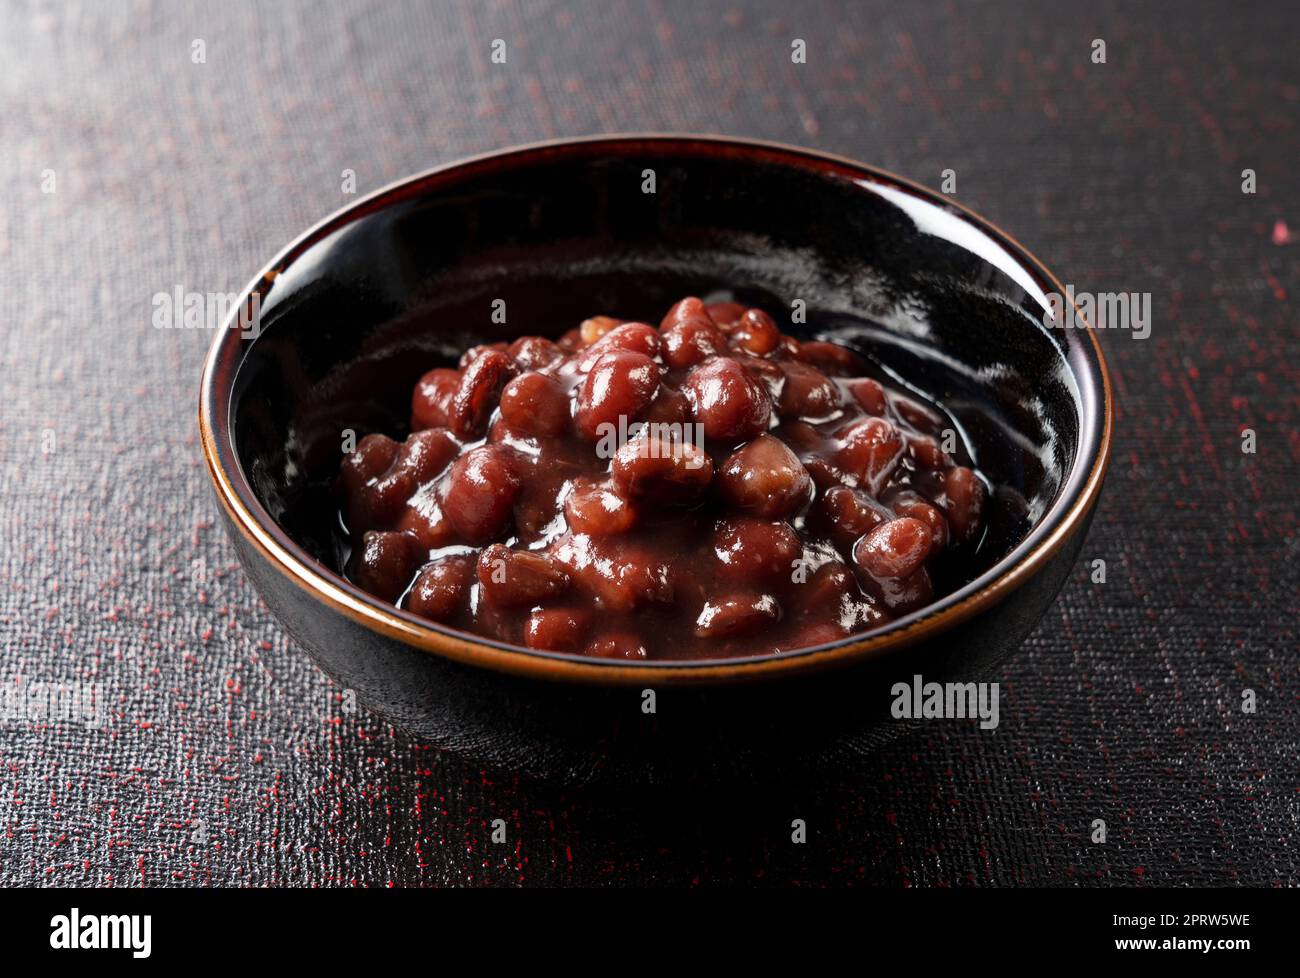 Boiled azuki beans placed on a black background. Stock Photo